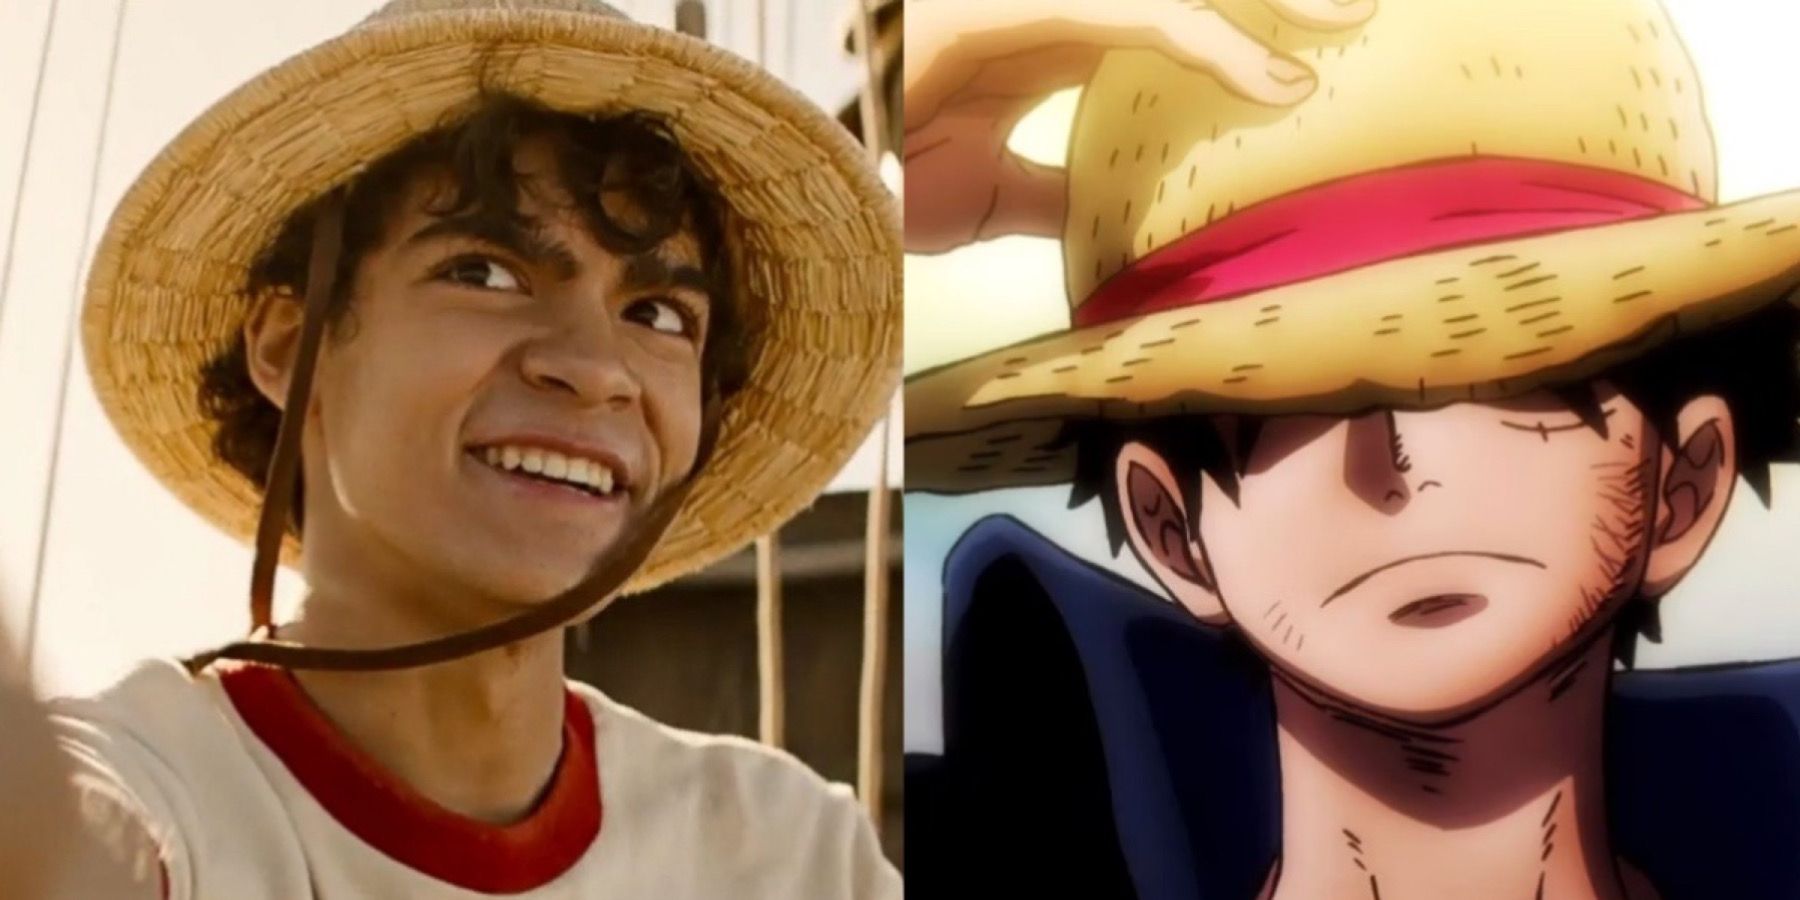 Top 5 ways One Piece Live Action is better than the anime